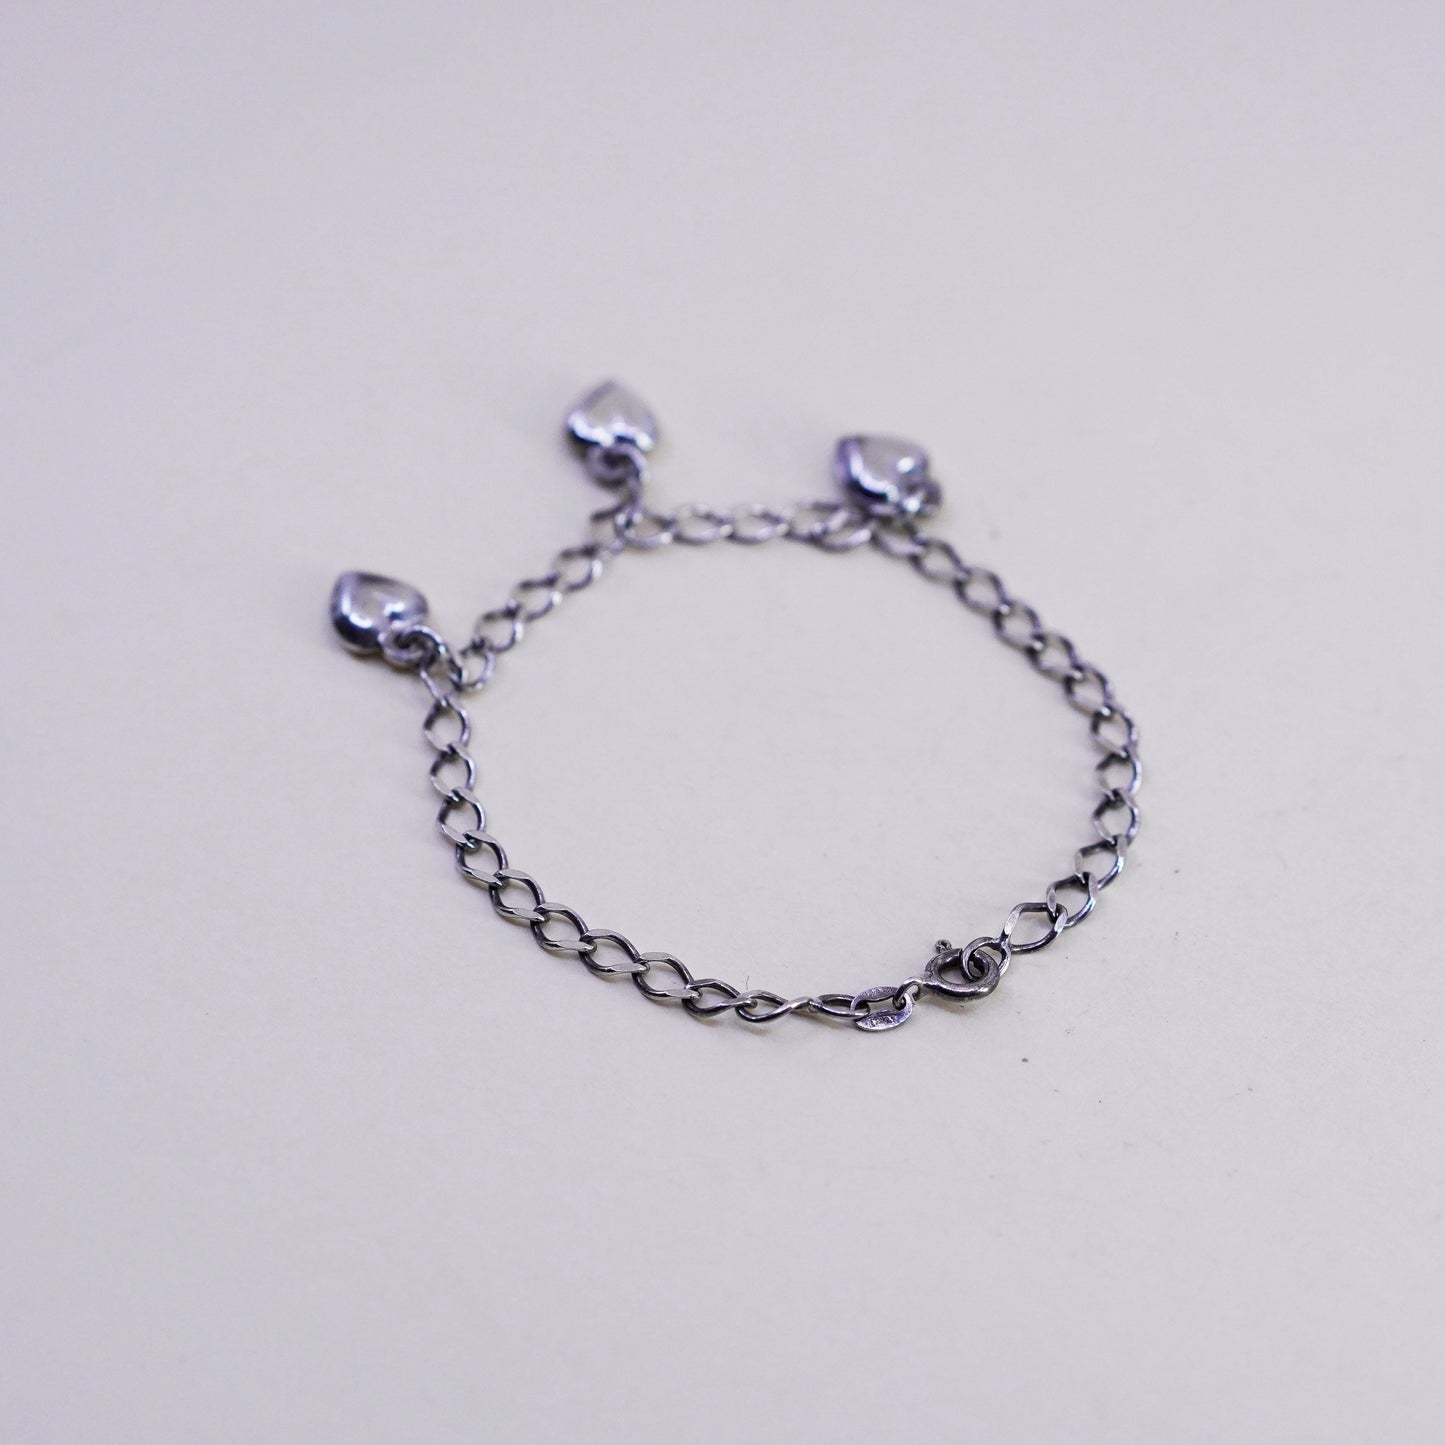 7”, 5mm, Vintage sterling silver curb bracelet, 925 chain with heart charms